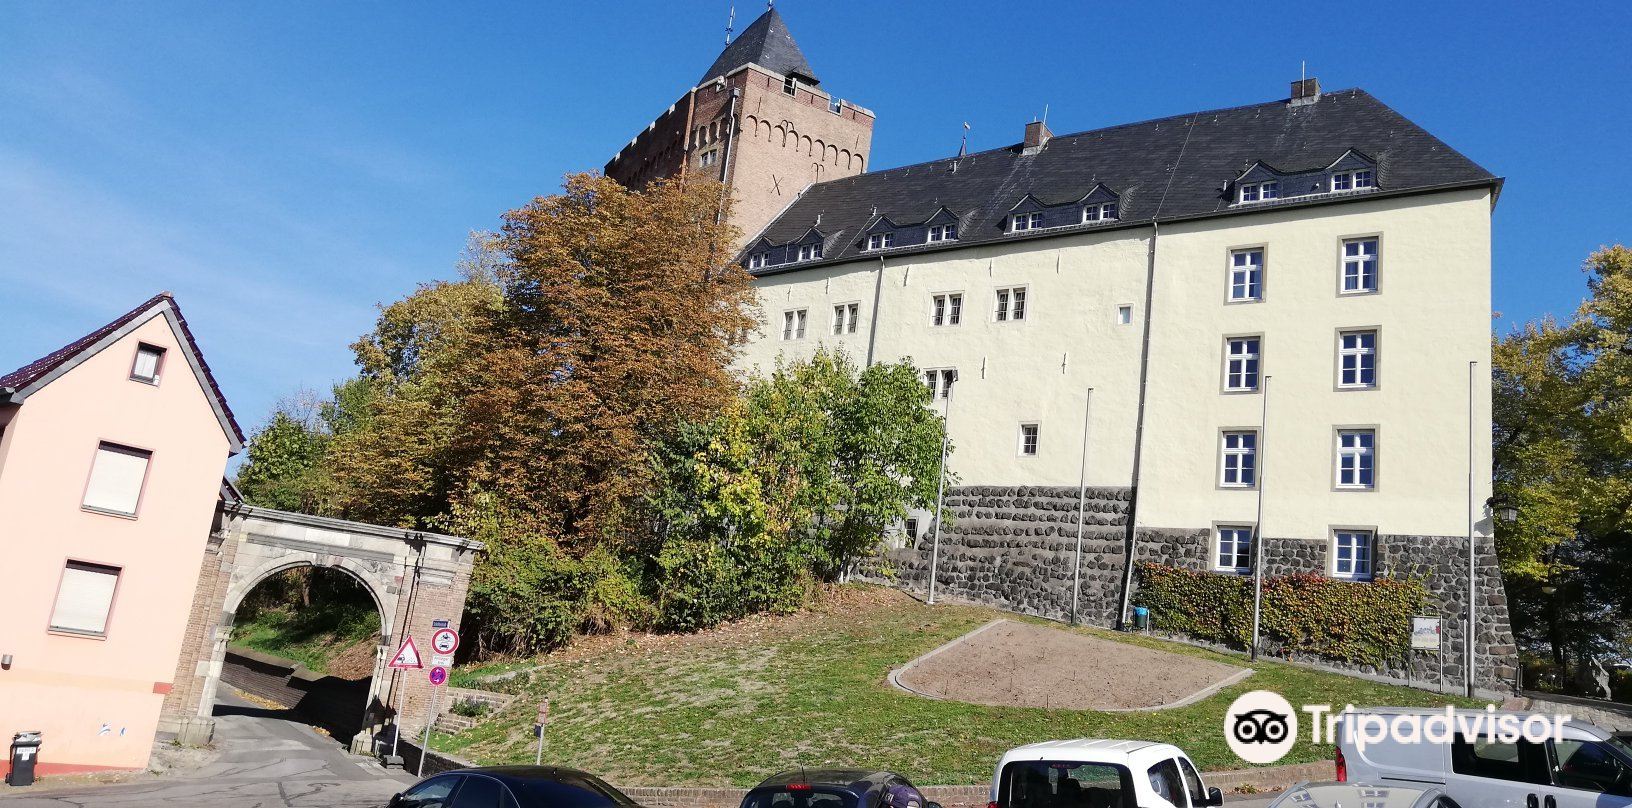 Latest travel itineraries for Castle Schwanenburg in September (updated in  2023), Castle Schwanenburg reviews, Castle Schwanenburg address and opening  hours, popular attractions, hotels, and restaurants near Castle  Schwanenburg - Trip.com